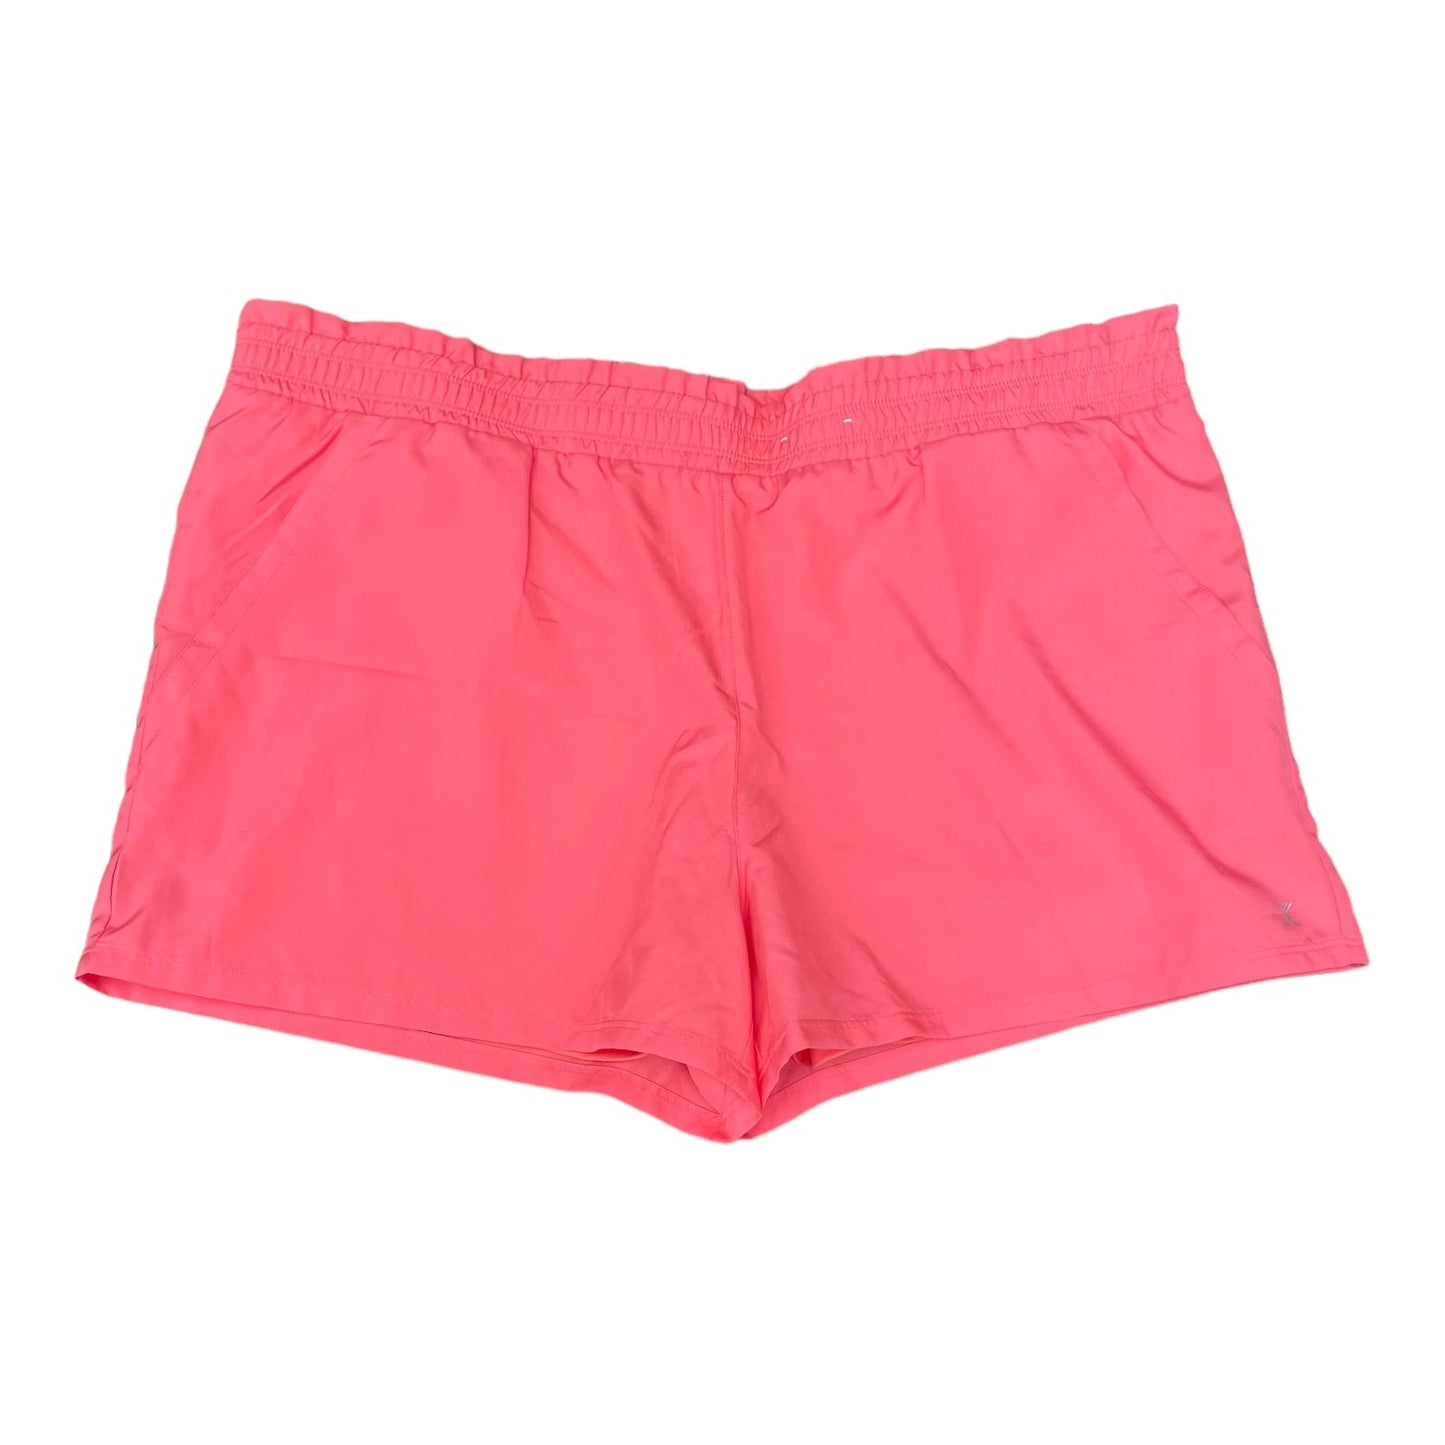 Pink Athletic Shorts Xersion, Size 3x